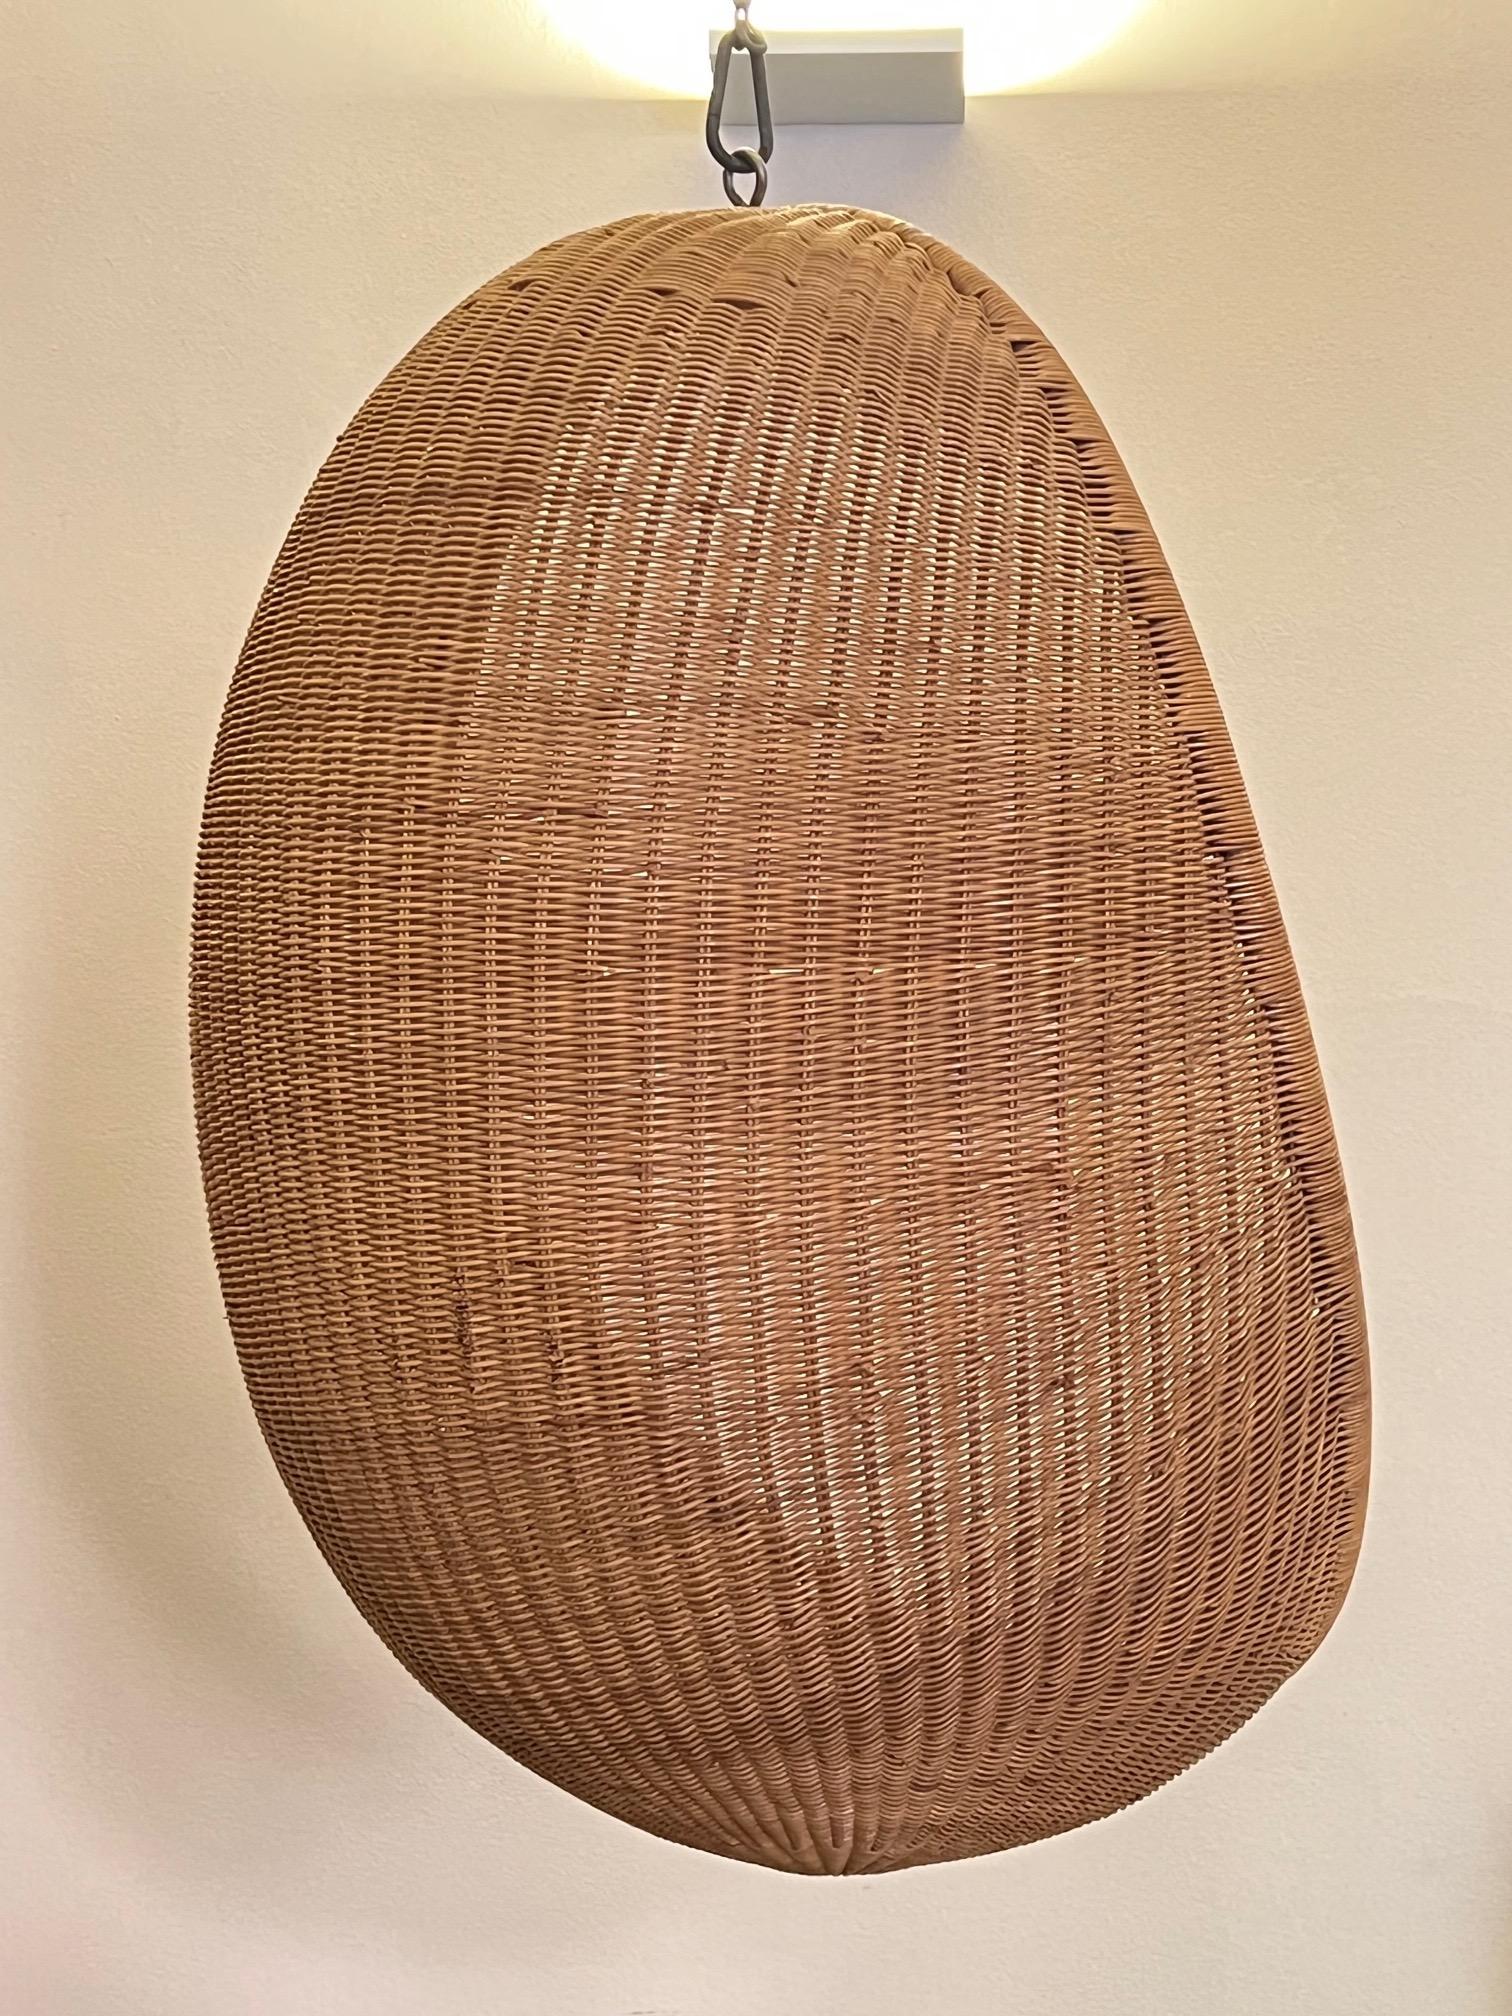 Mid-20th Century Egg Hanging Chair by Nanna Ditzel, Authentic Historical Edition, 1959 For Sale